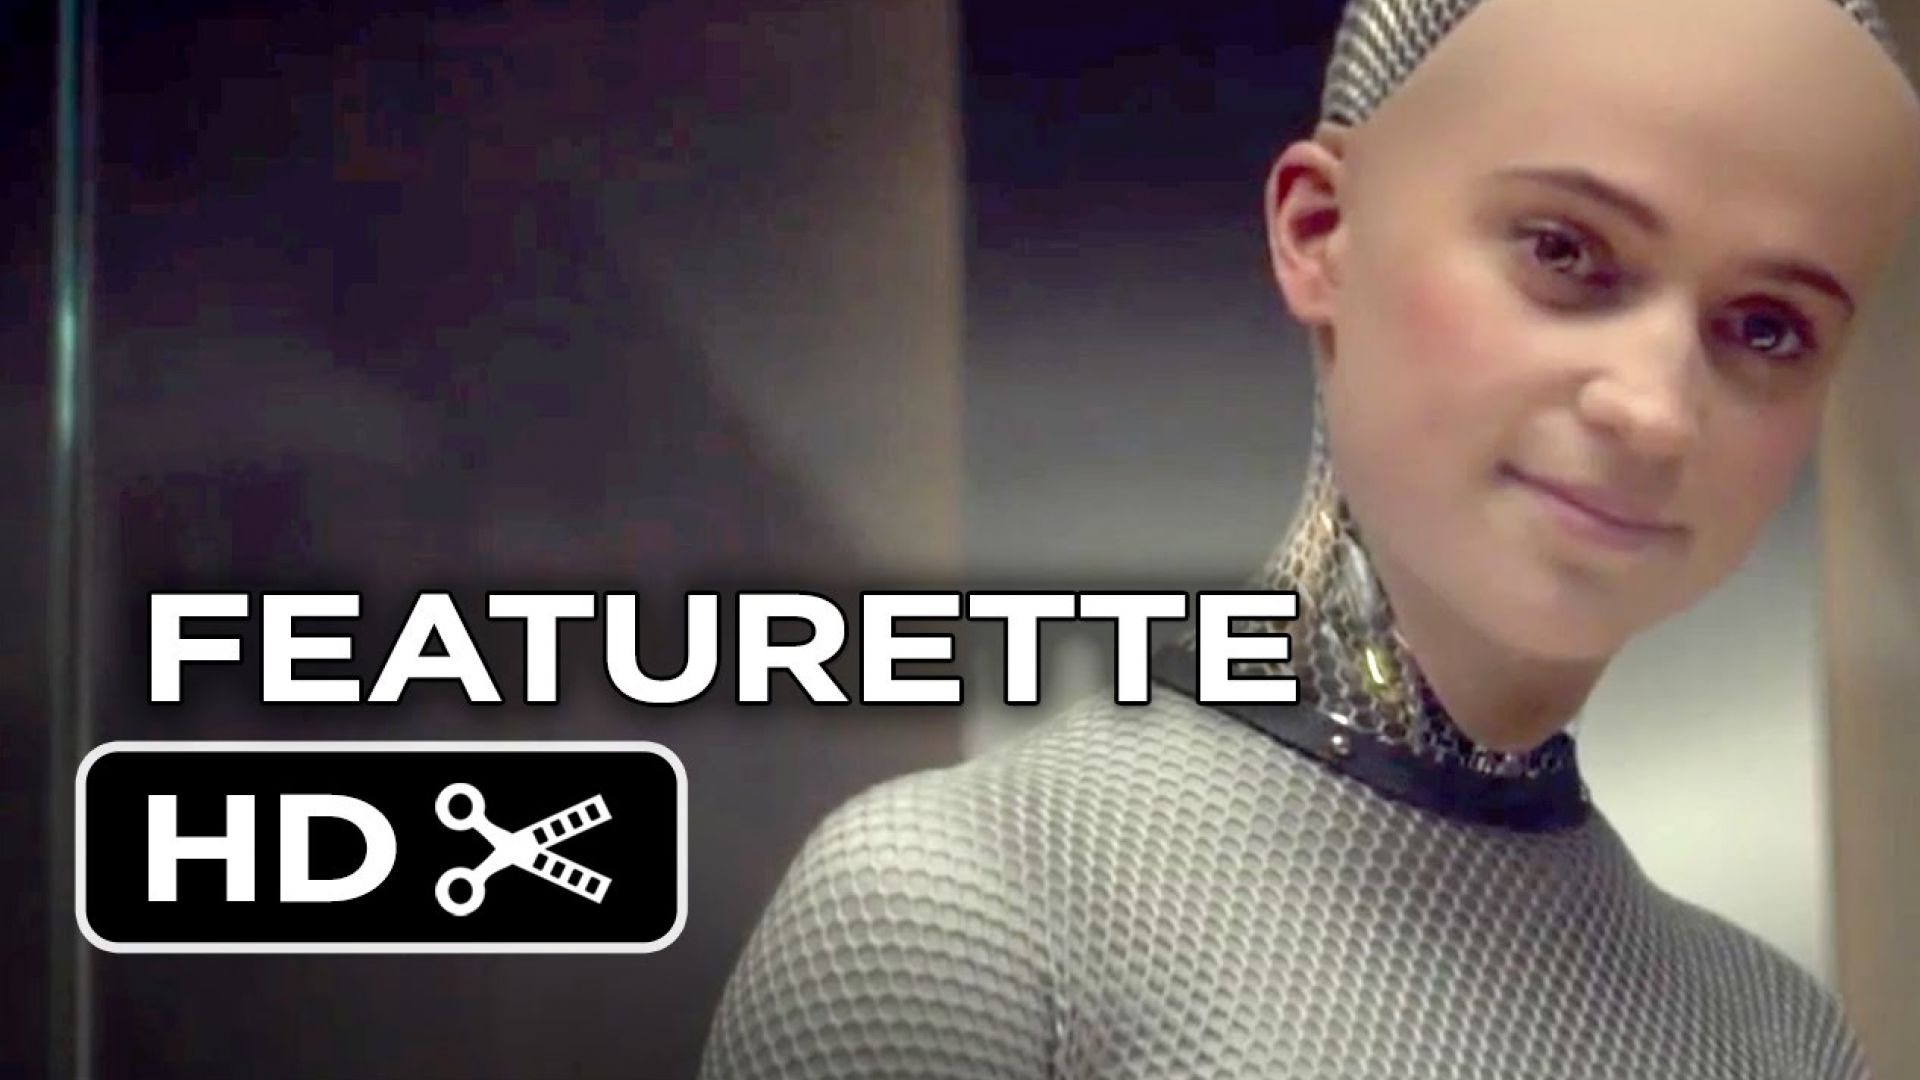 Watch how Eva was created in this Ex Machina featurette